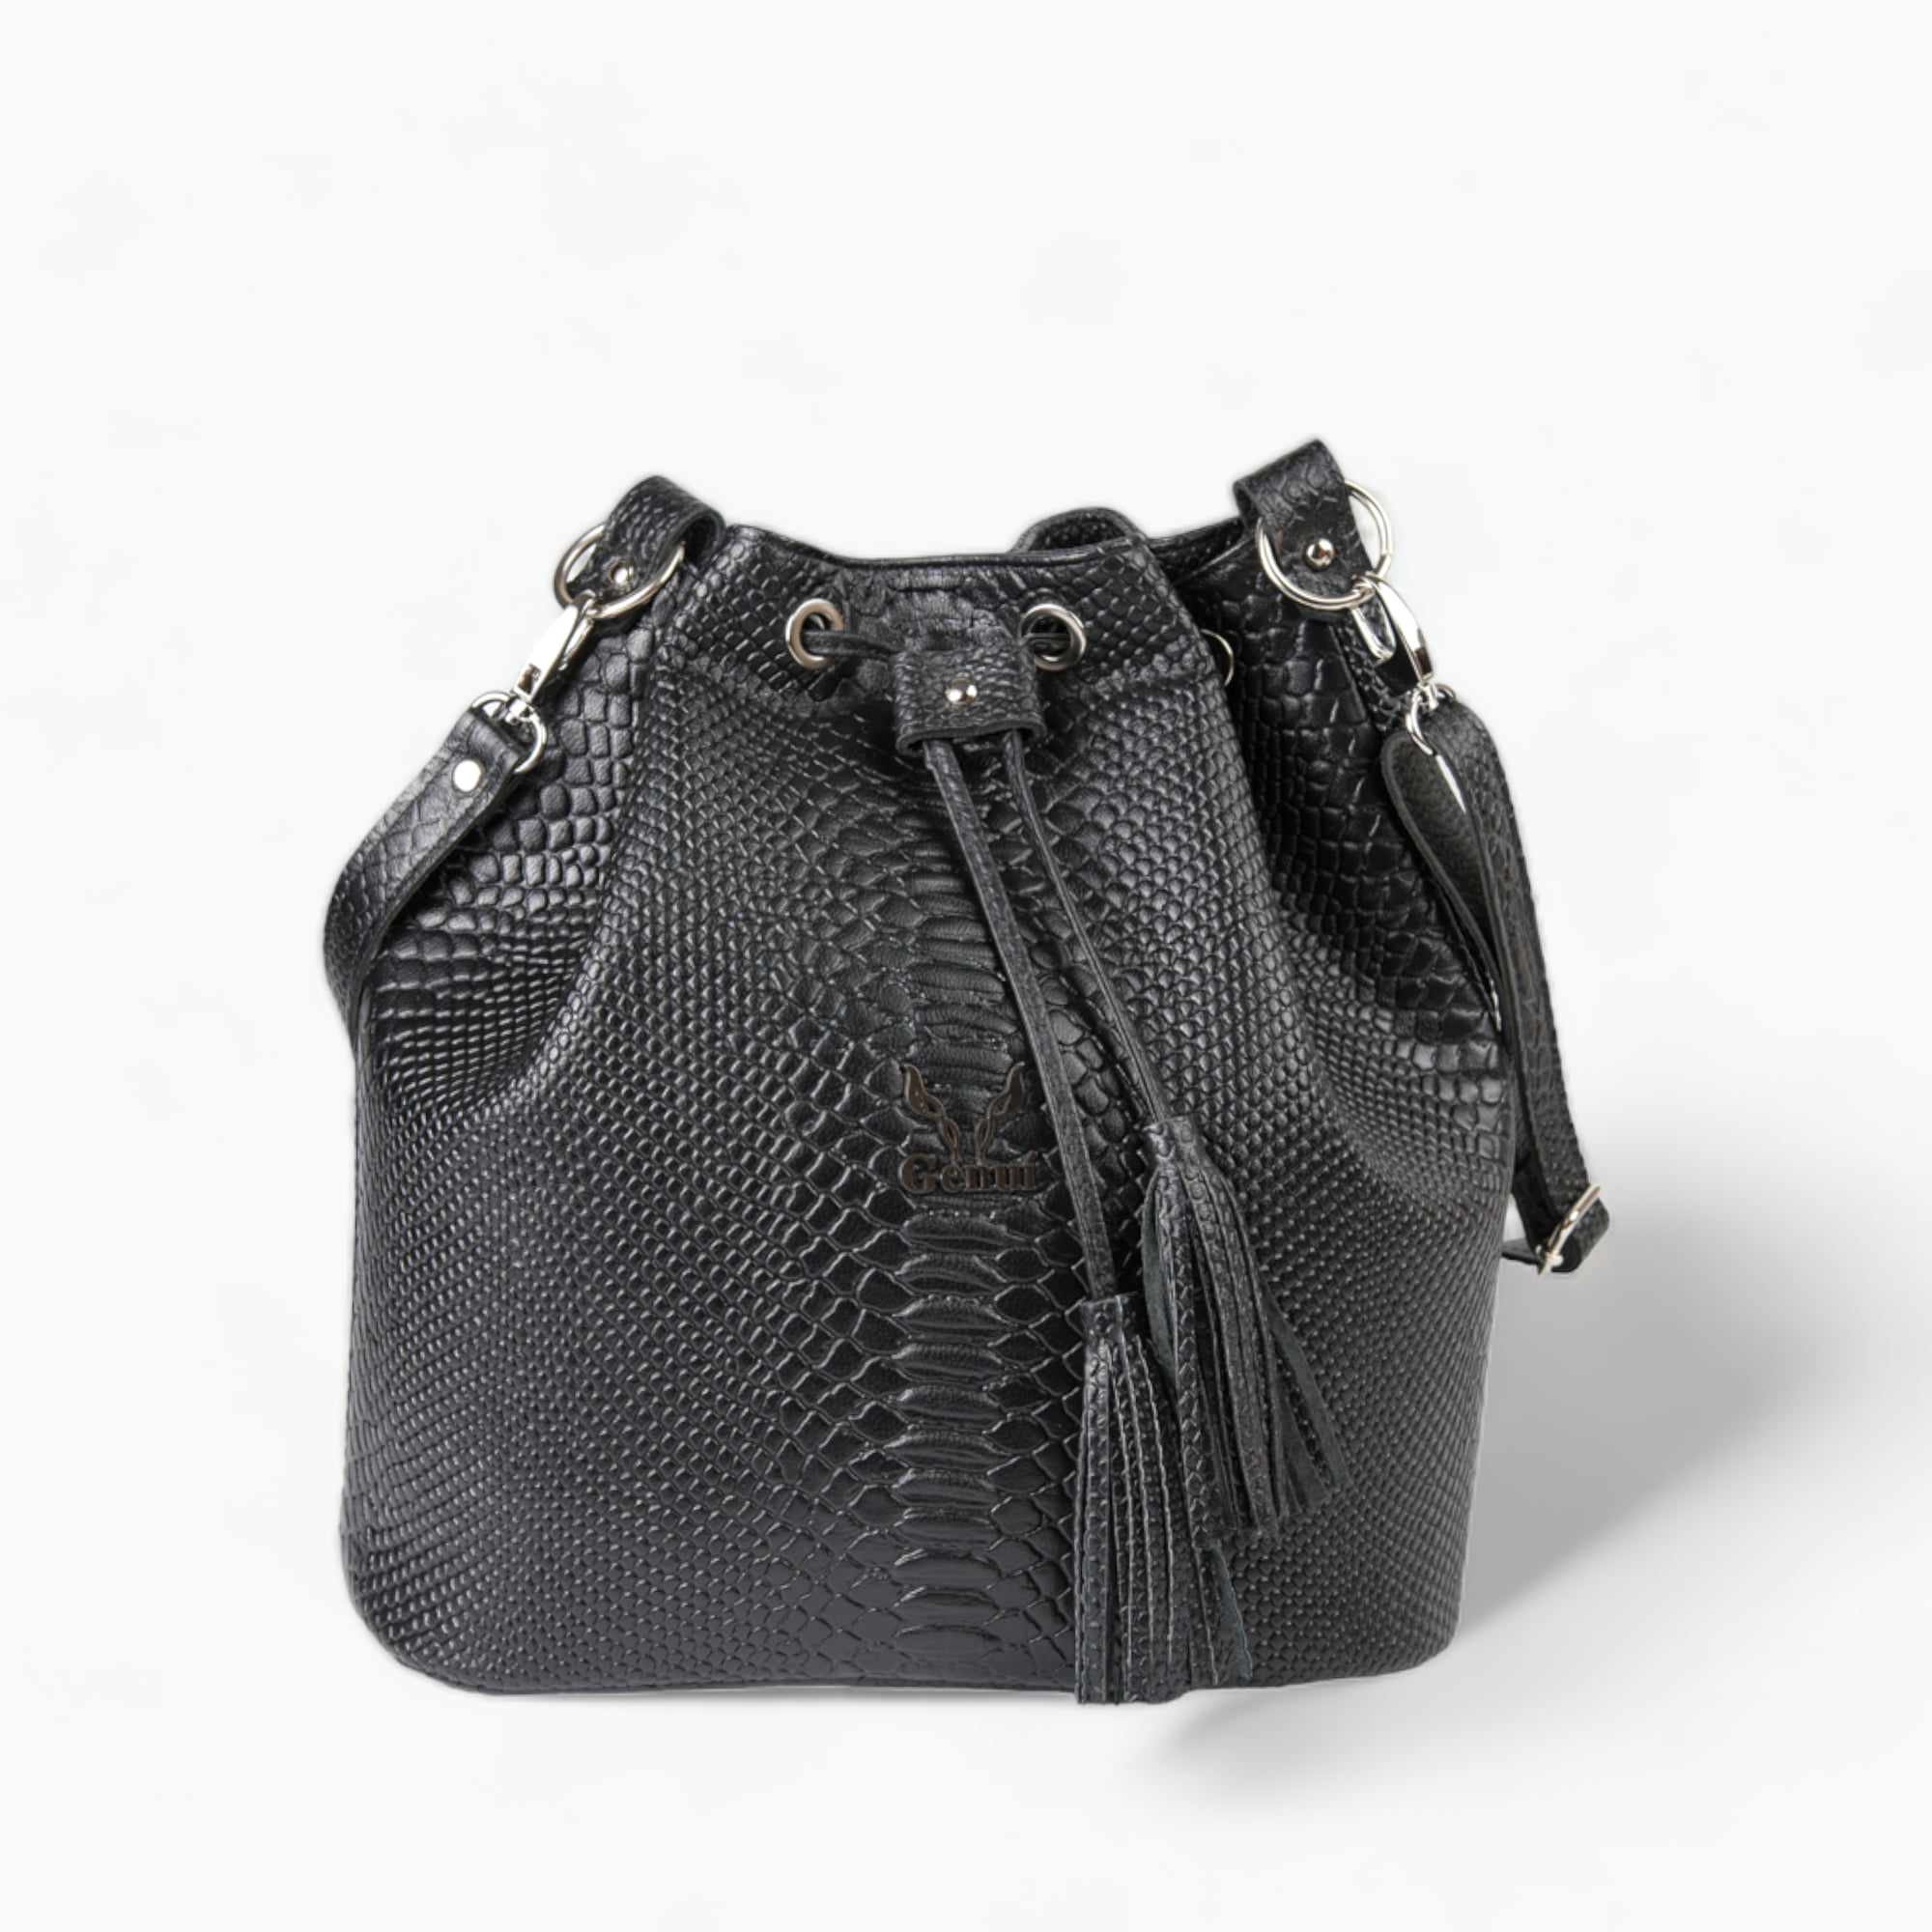 Leather polymorphic pouch bag in black color